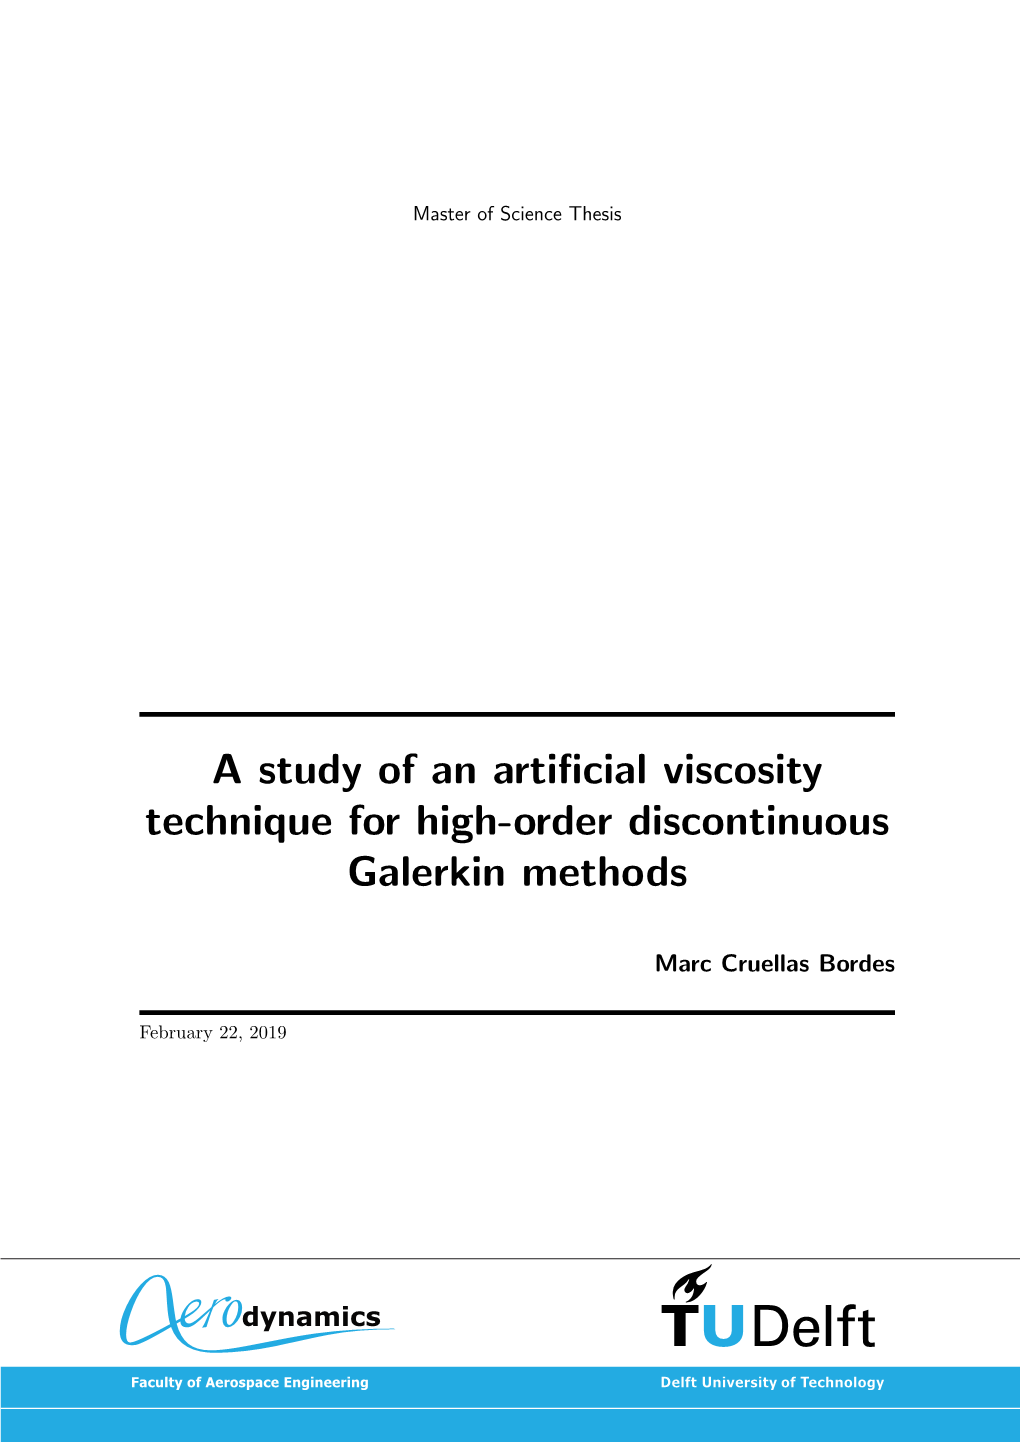 A Study of an Artificial Viscosity Technique for High-Order